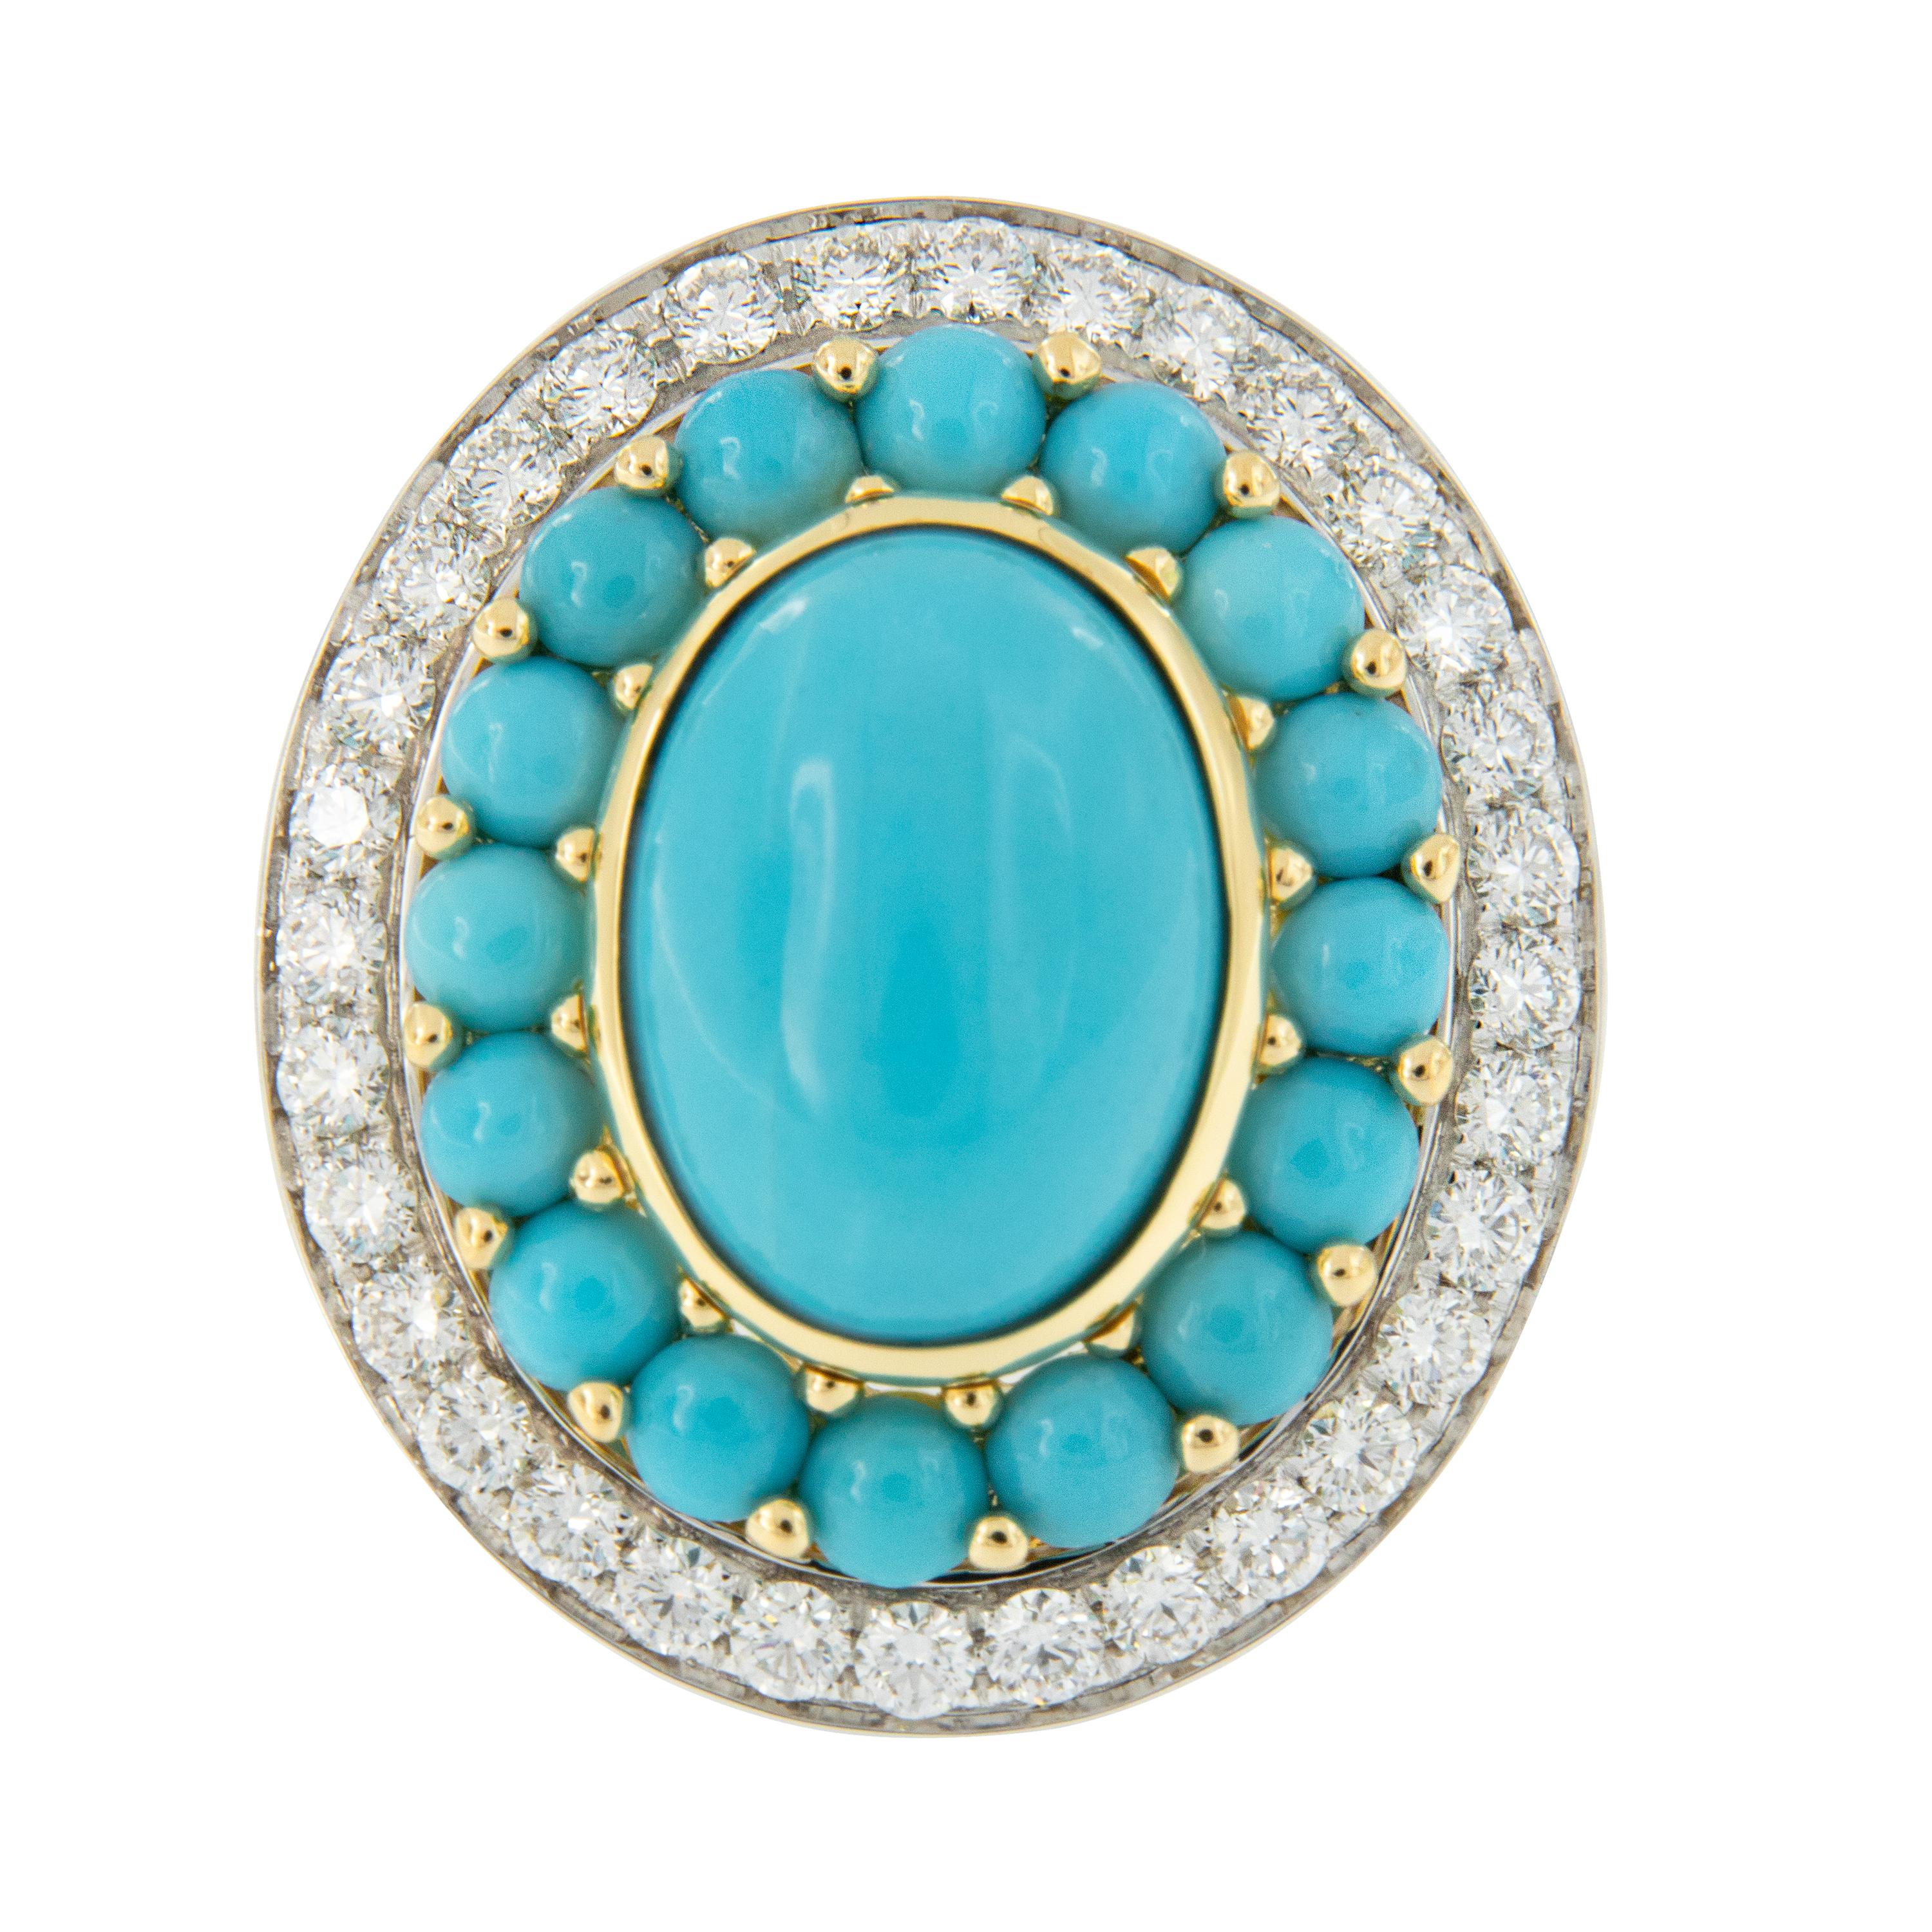 From Afghanistan to the Zuni Pueblo, people the world over have revered turquoise as a good luck stone for centuries. Blue as the summer sky or a robin’s egg, this stone has inspired many mystical associations. Made in Italy, this 18 karat yellow